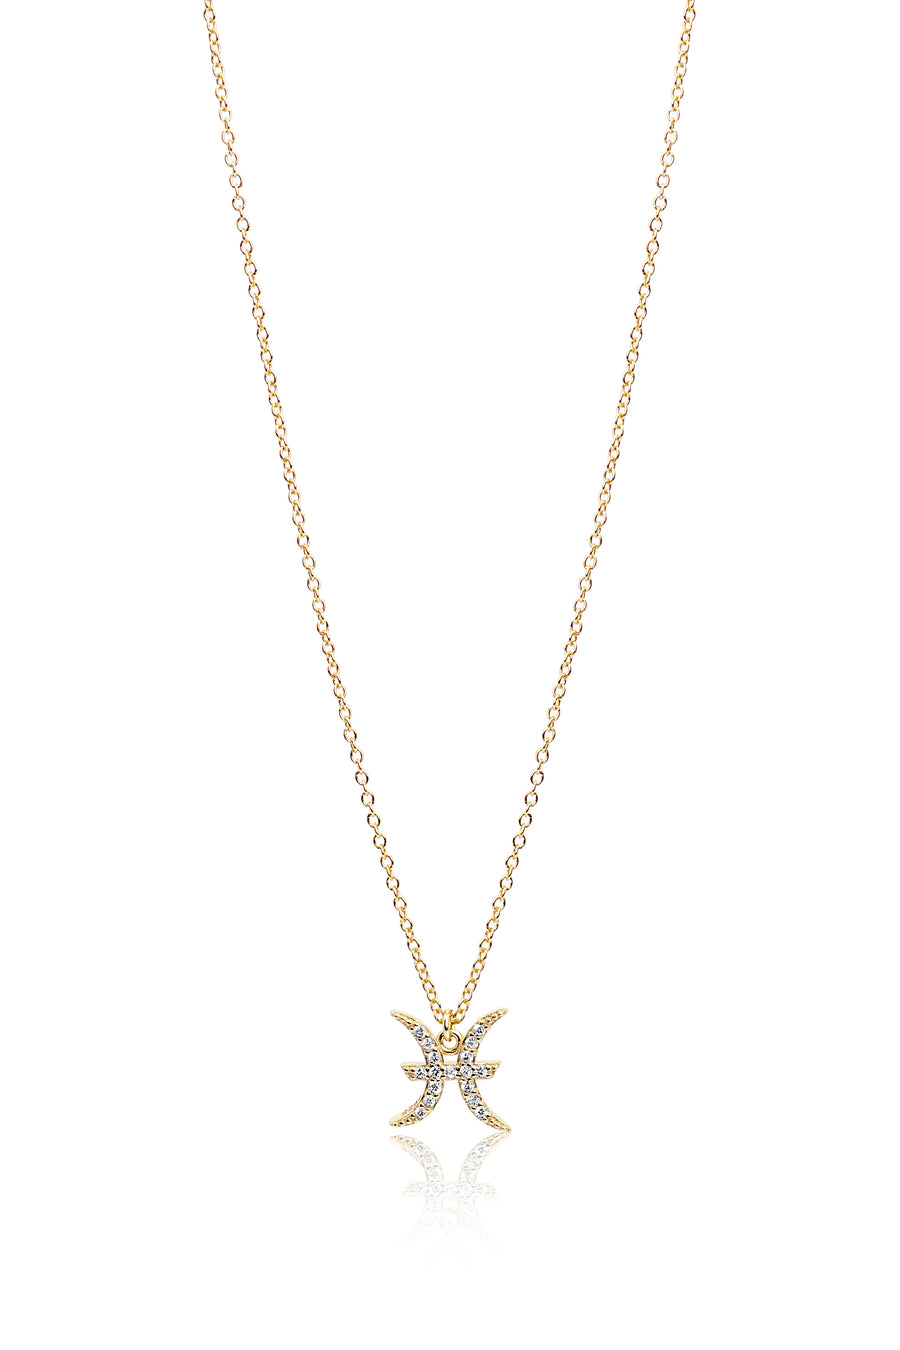 The Star Sign Necklaces